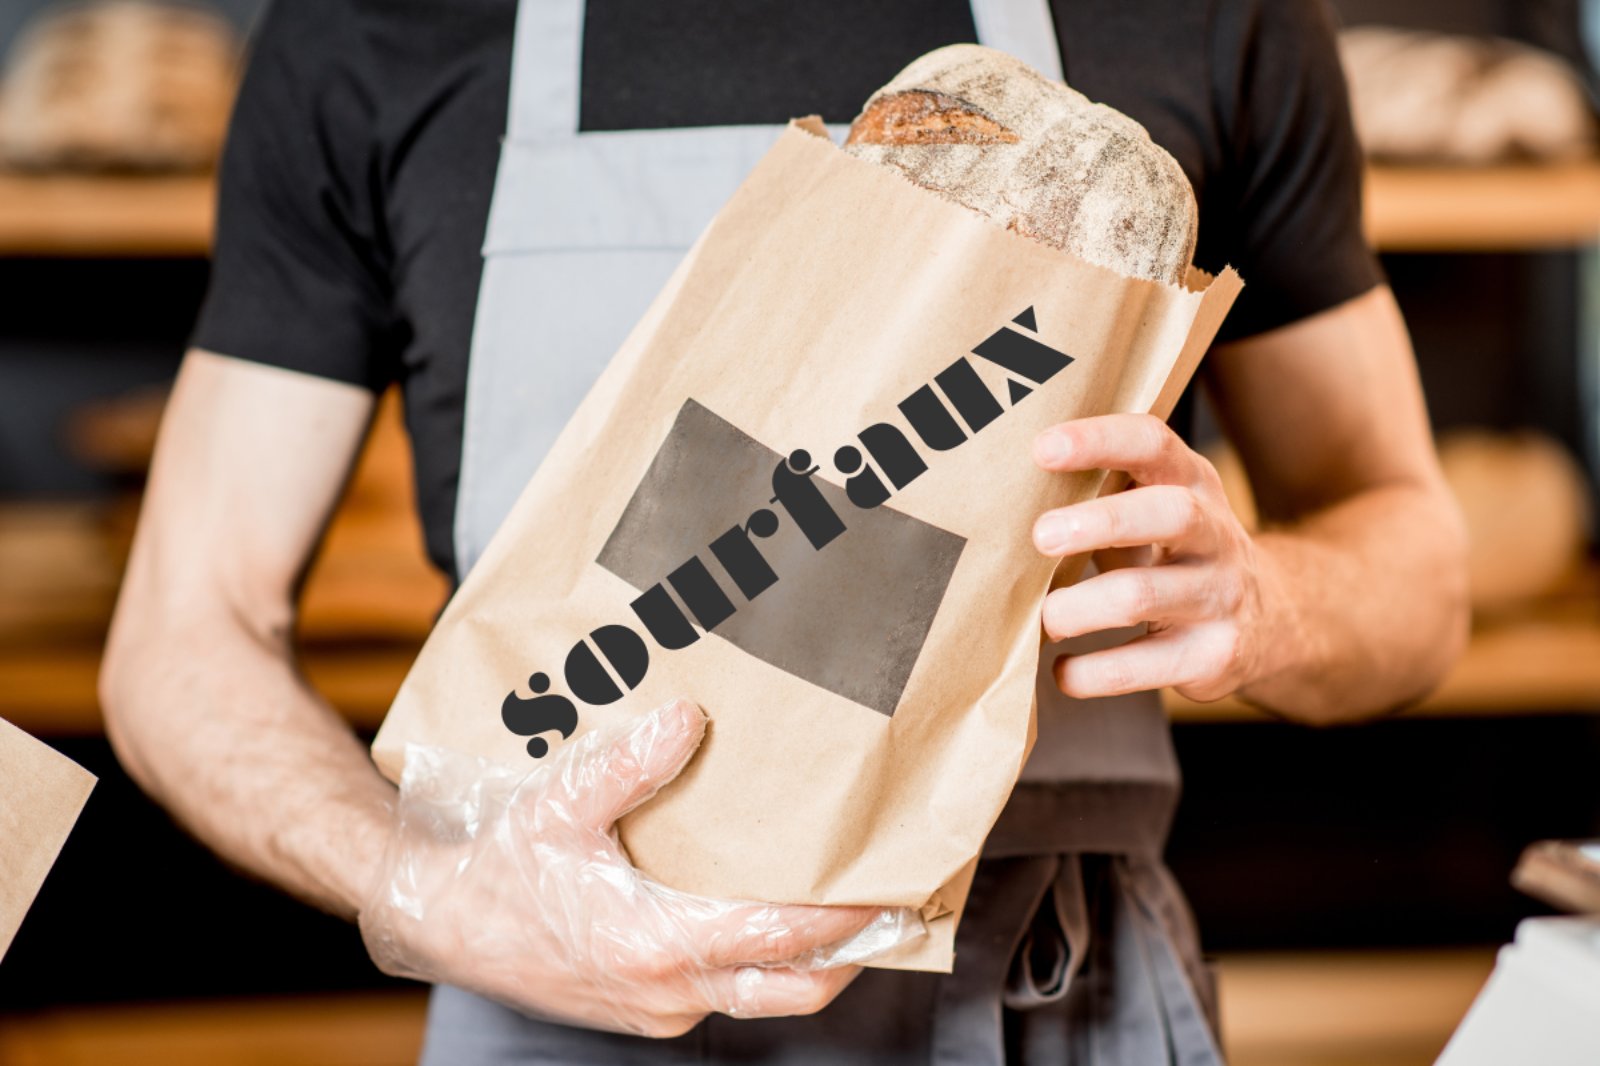 Withdraw sourfaux code support' urge 1000+ bakers and buyers | Sustain